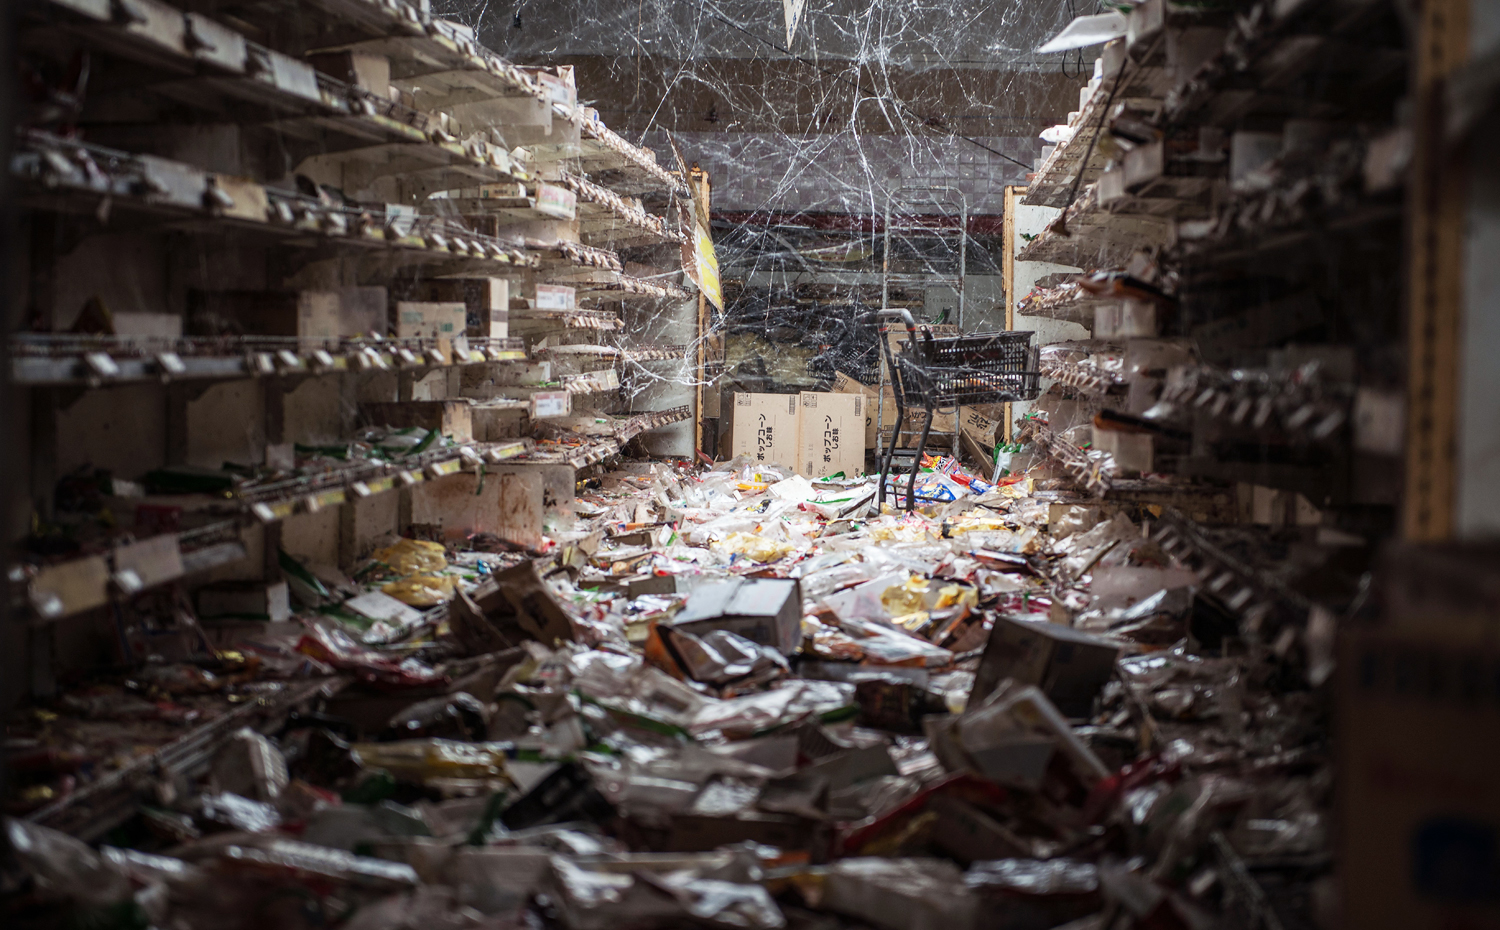 An aisle of a supermarket with products left on the floor. Since the disaster nature has been at work and cobwebs now hang between the shelves. Photo: Arkadiusz Podniesinski/REX Shutterstock